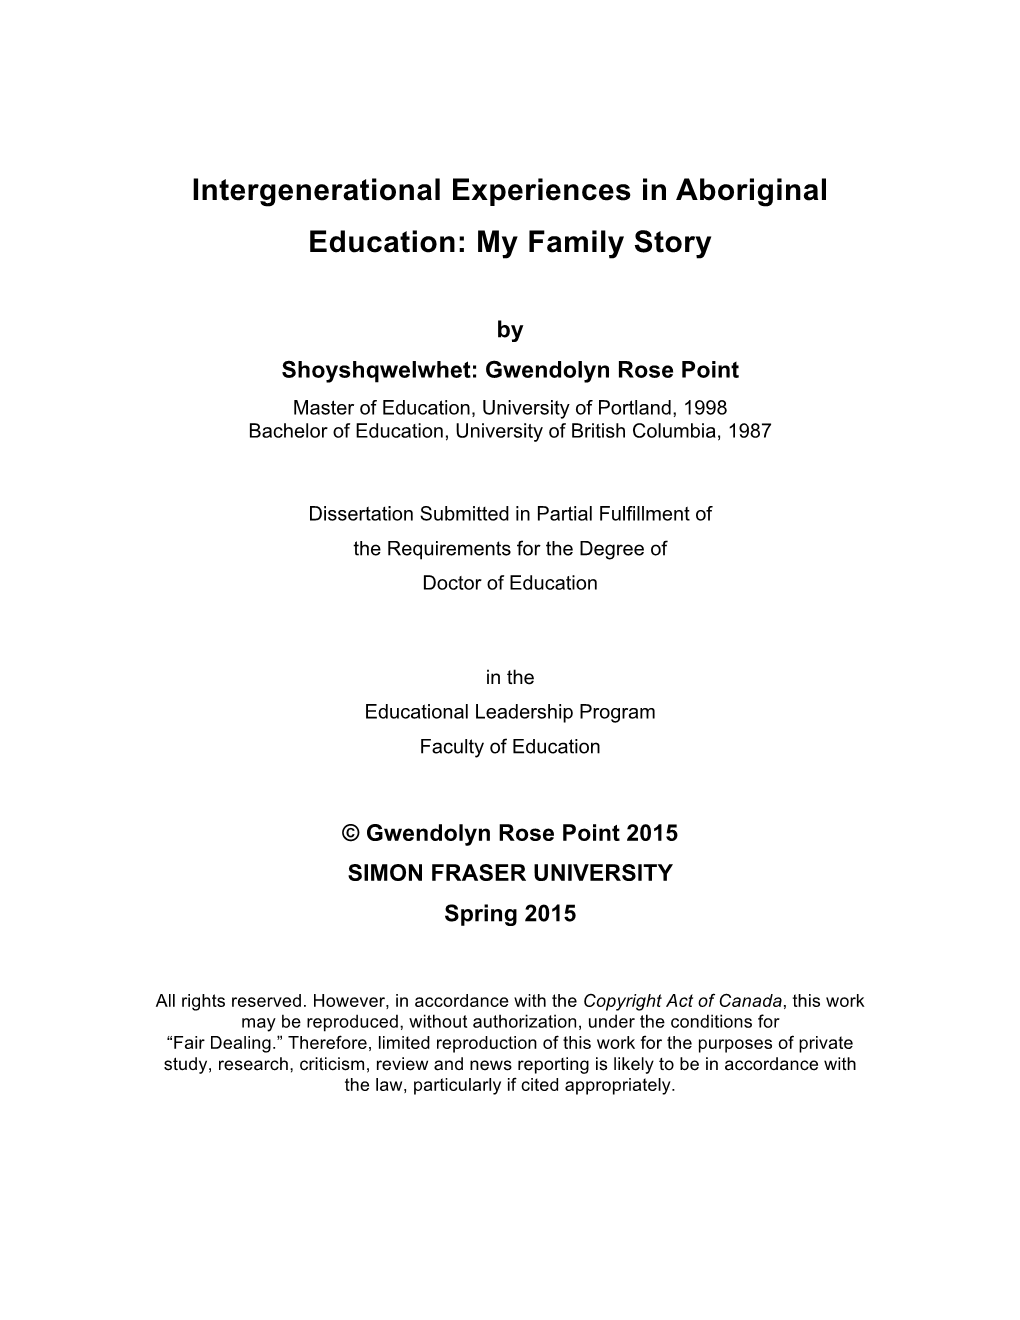 Intergenerational Experiences in Aboriginal Education: My Family Story